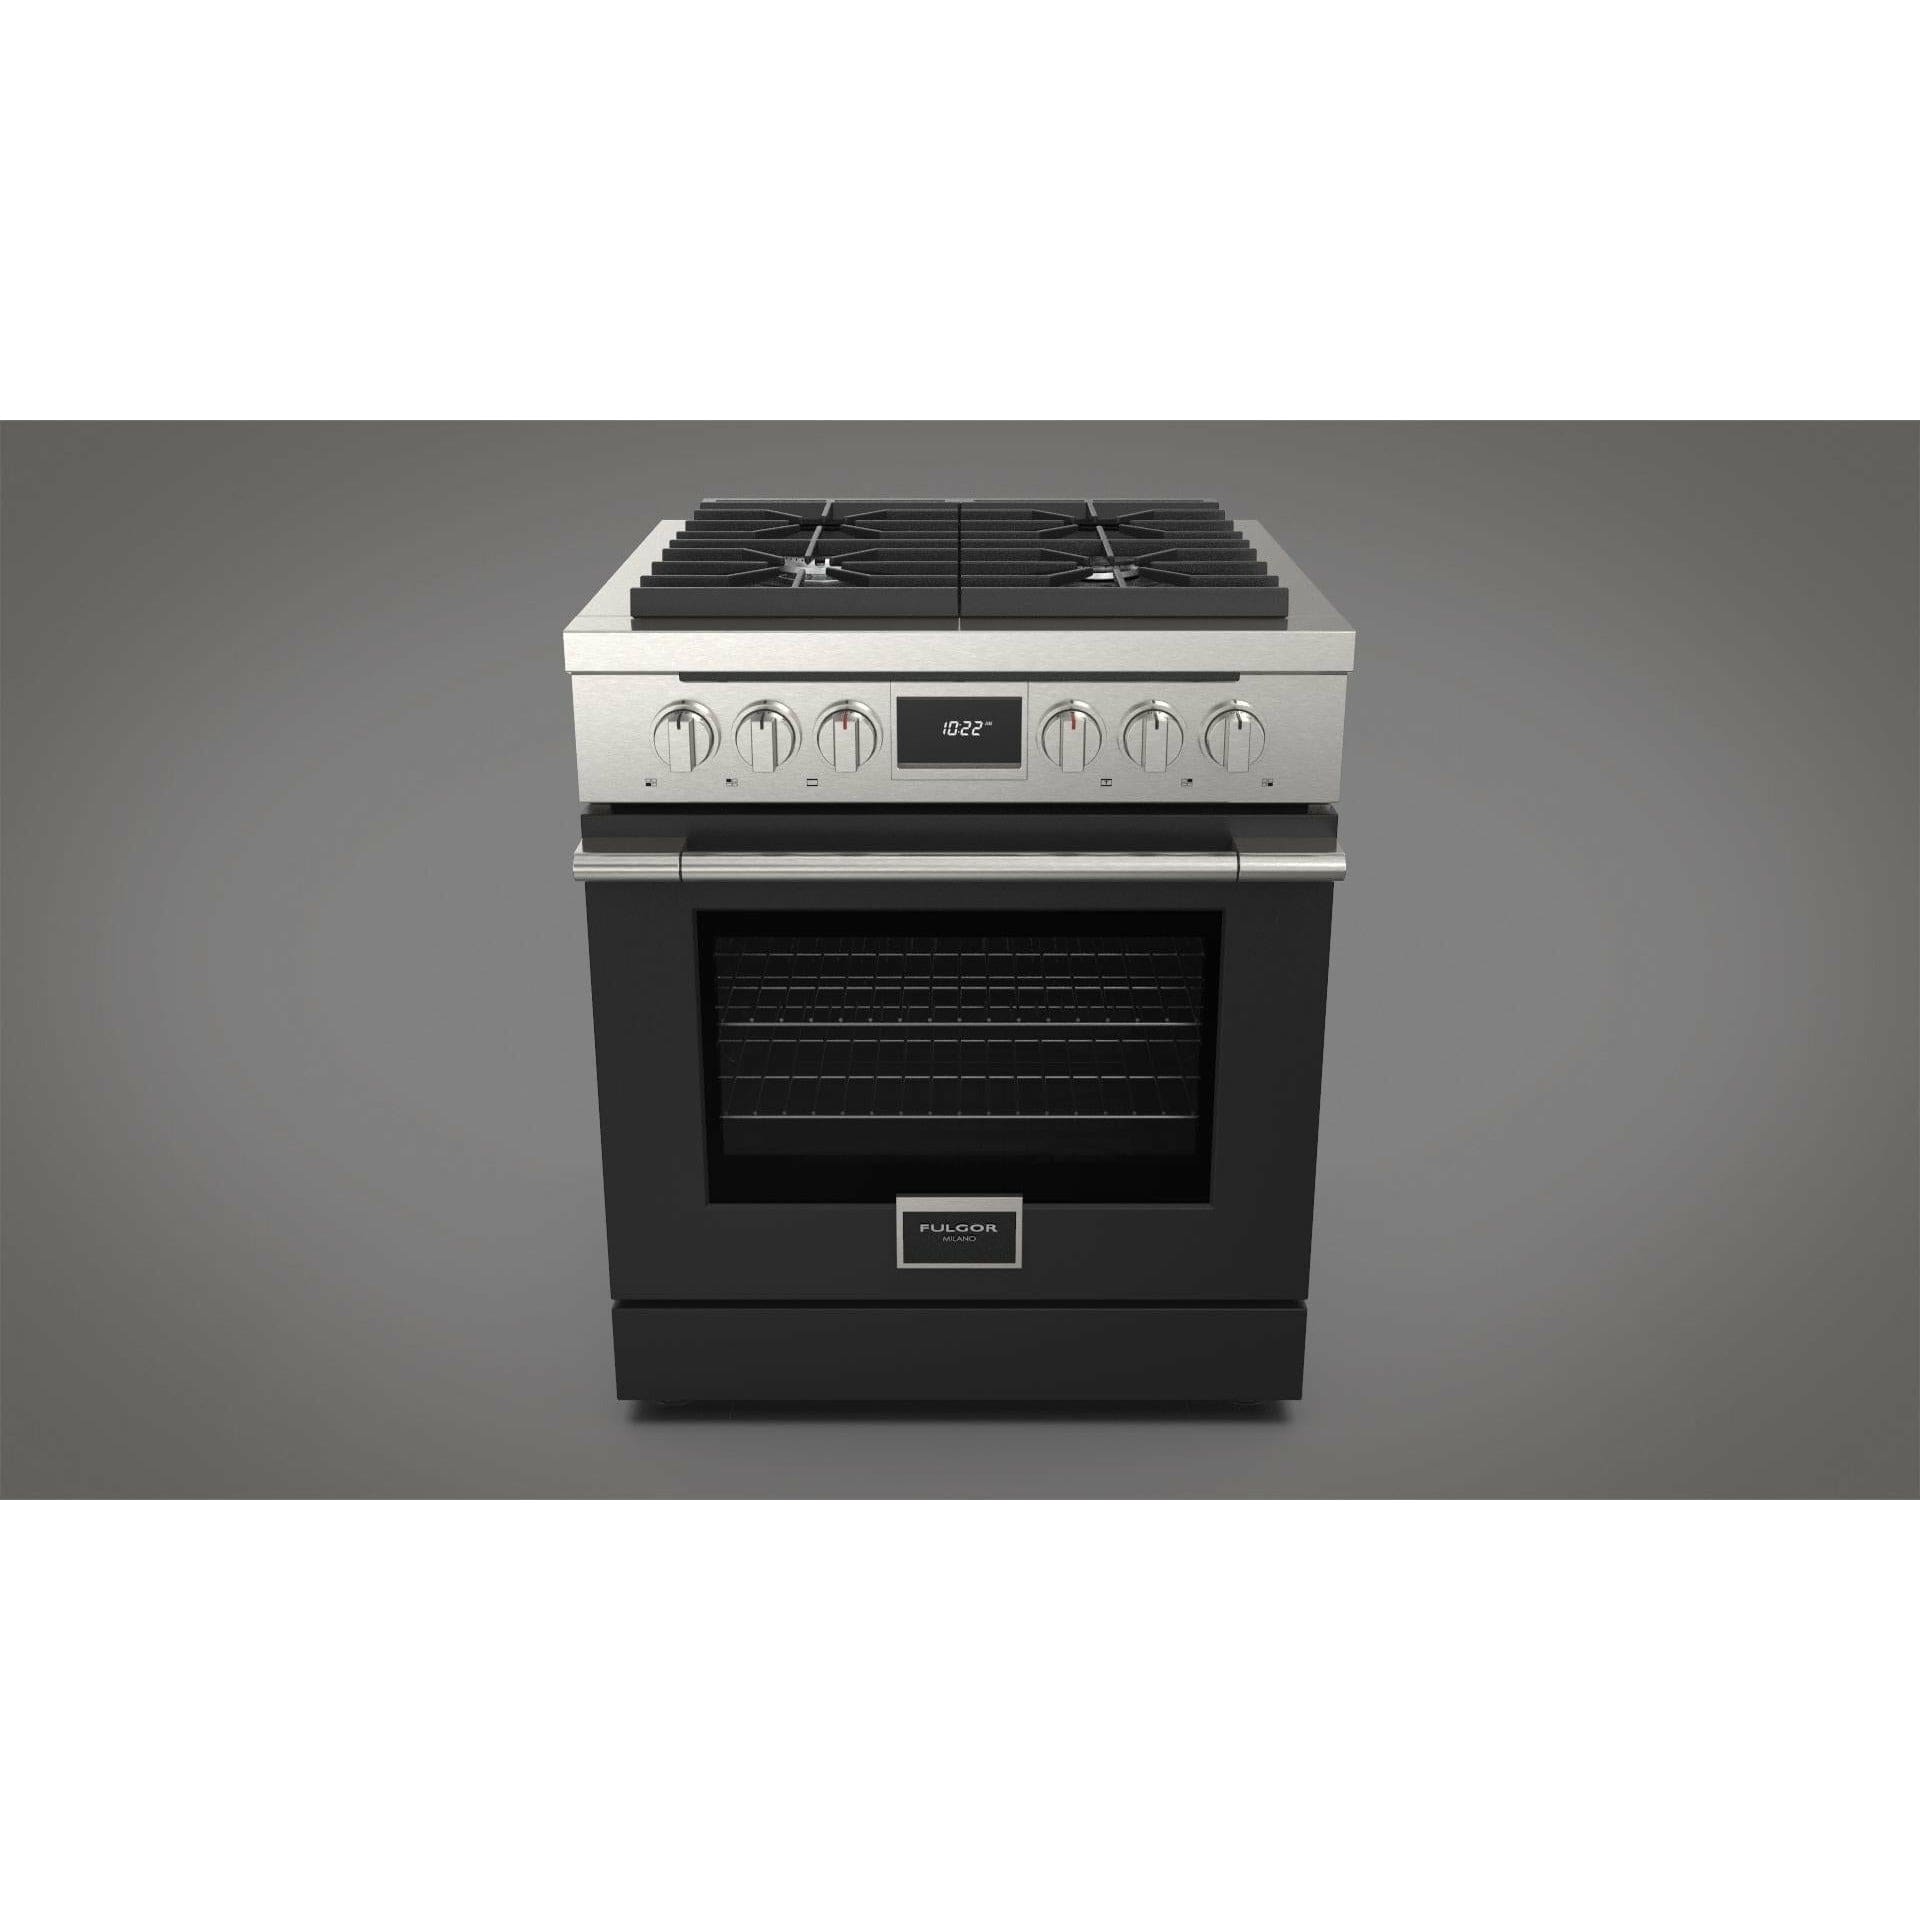 Fulgor Milano 30" Pro-Style Dual Fuel Range with 4 Sealed Burners,  4.4 Cu. Ft. Capacity w/  Stainless Steel - F4PDF304S1 Ranges ACDKIT30MB Luxury Appliances Direct